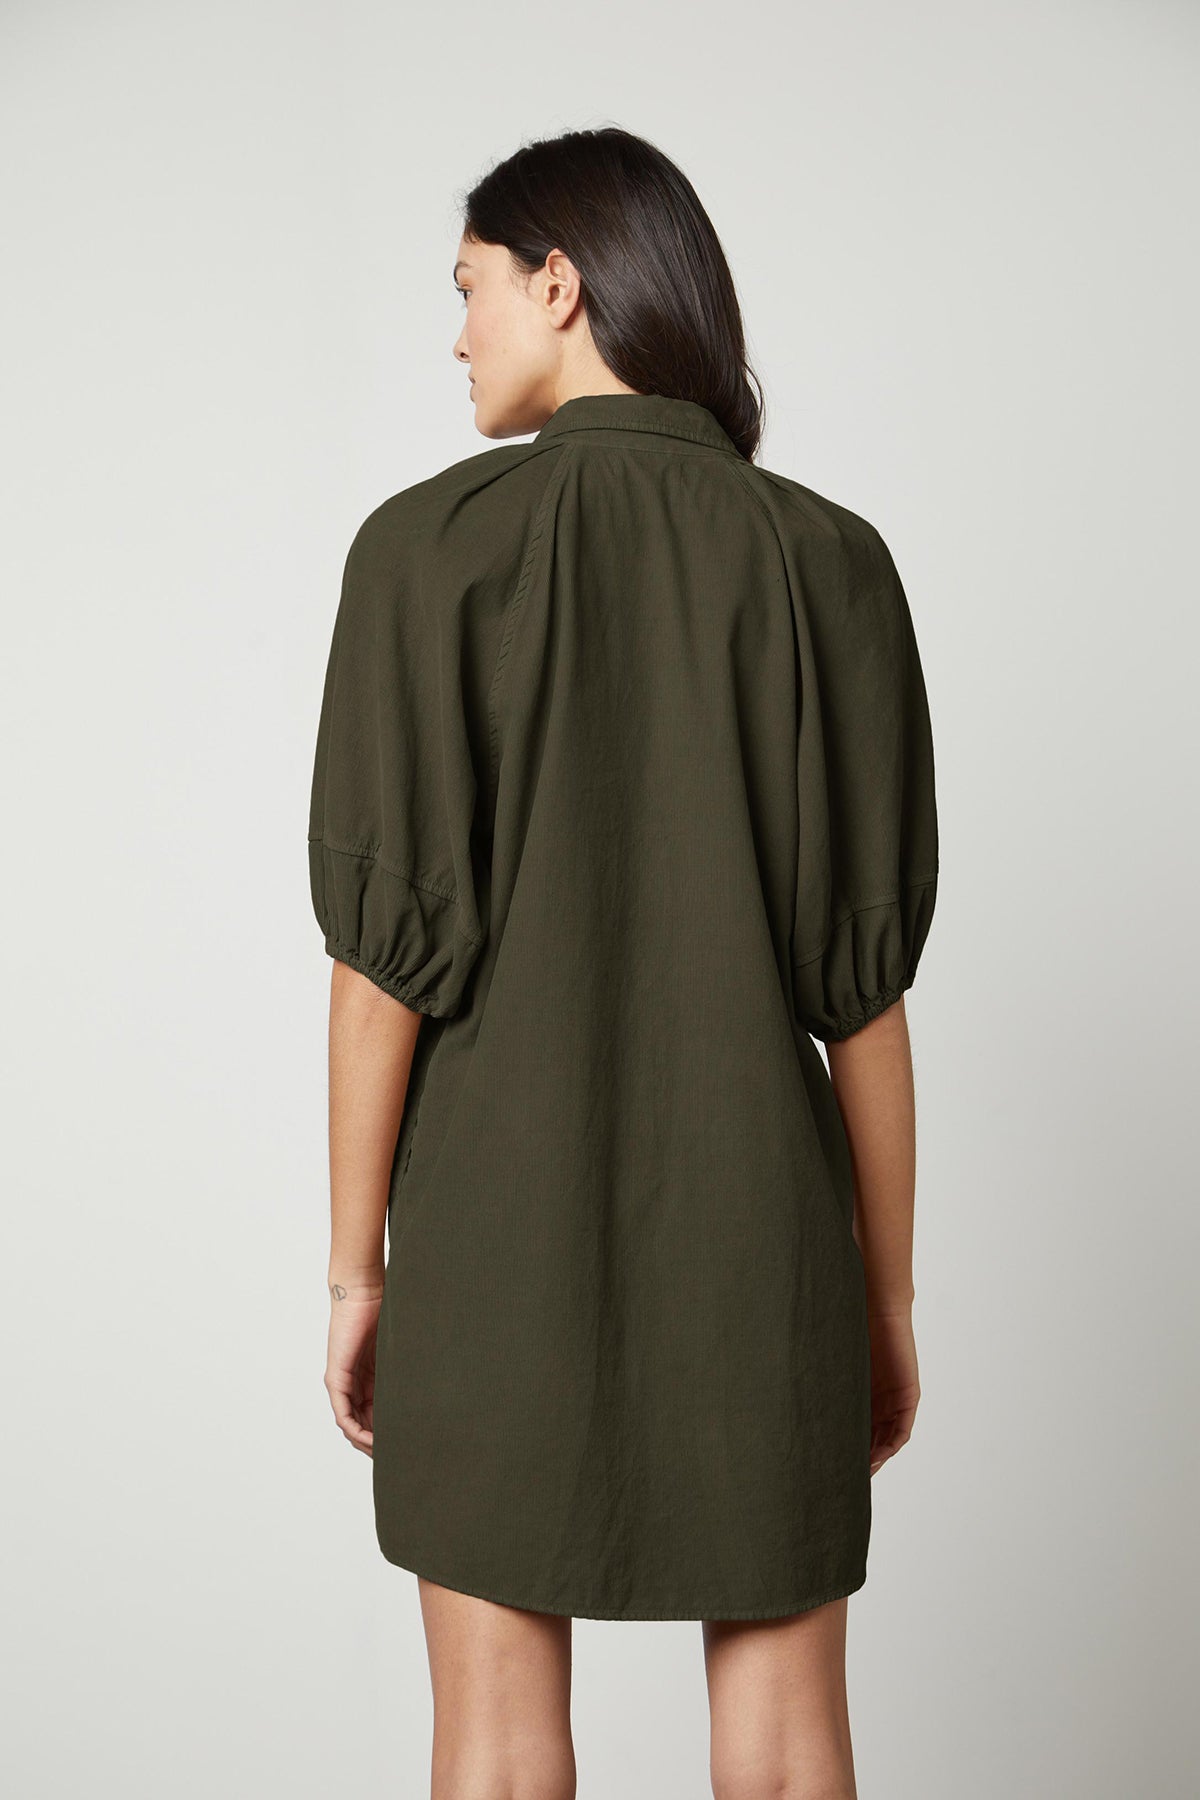 The back view of a woman wearing a KADY CORDUROY BUTTON-UP DRESS, perfect for everyday wear.-26921328672961